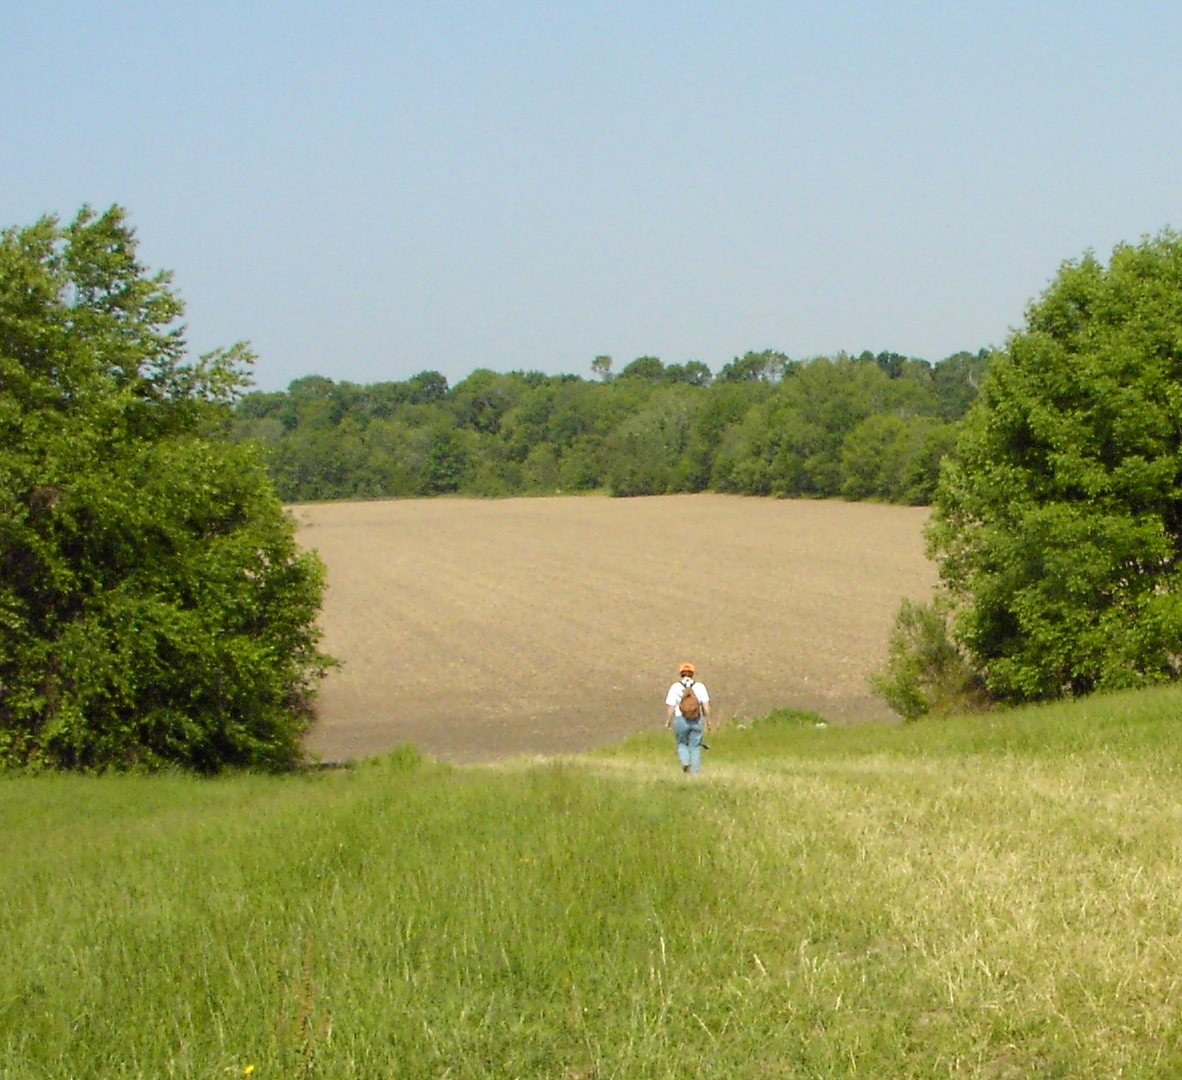 Phase I survey of 123 acres  in Clinton and Highland Counties, Ohio.